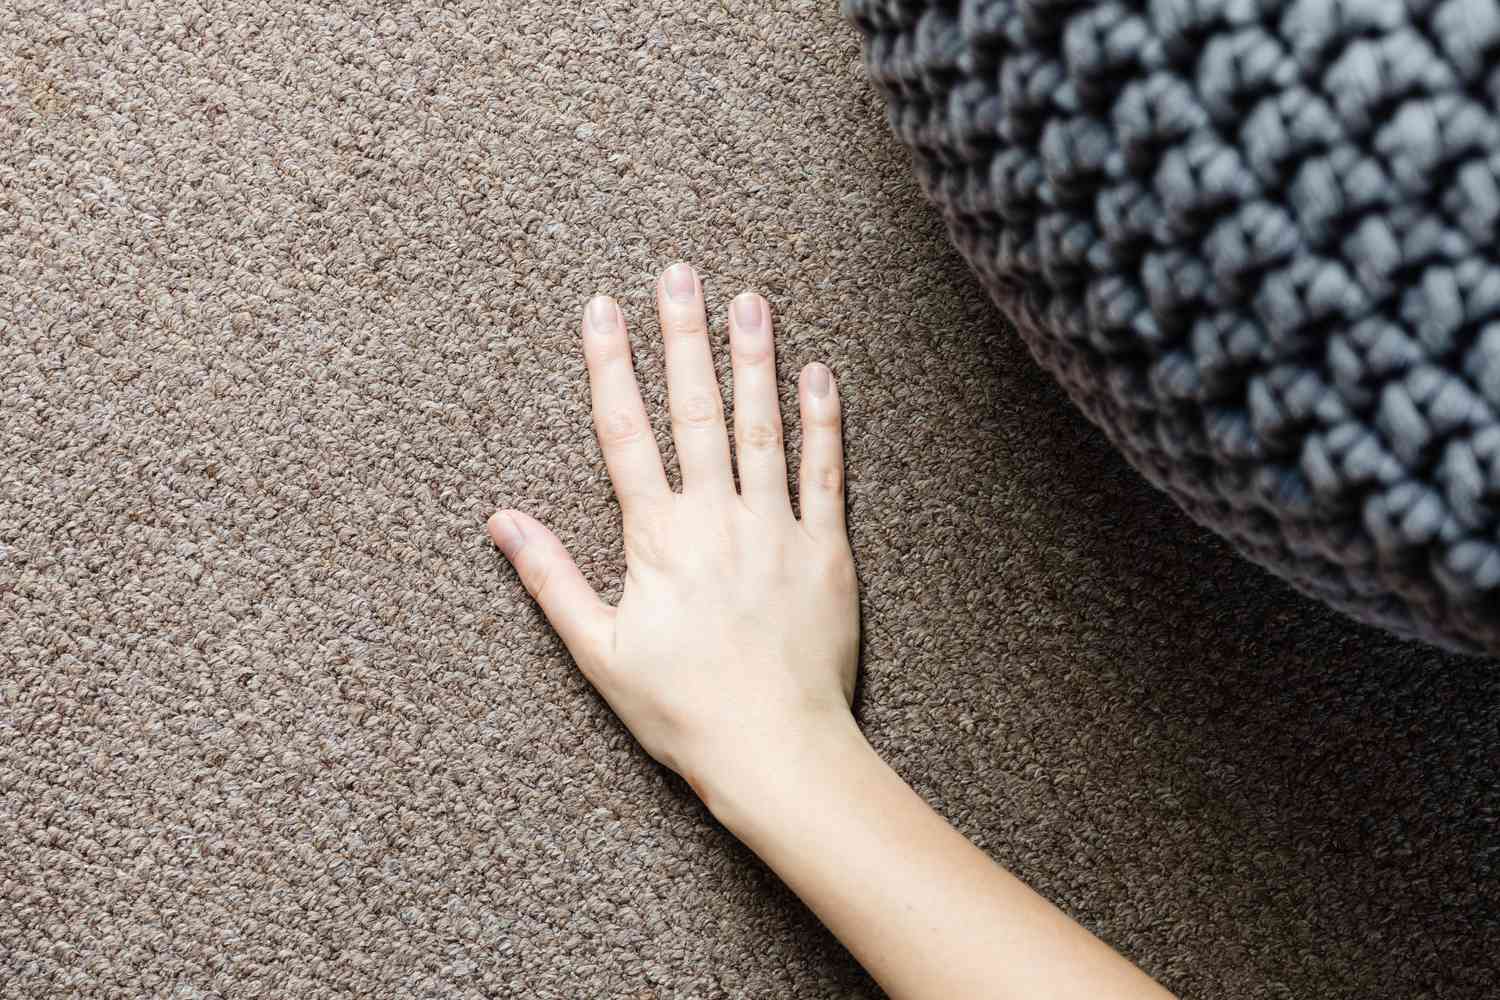 Hand passing over tan carpetted floor next to gray pouf